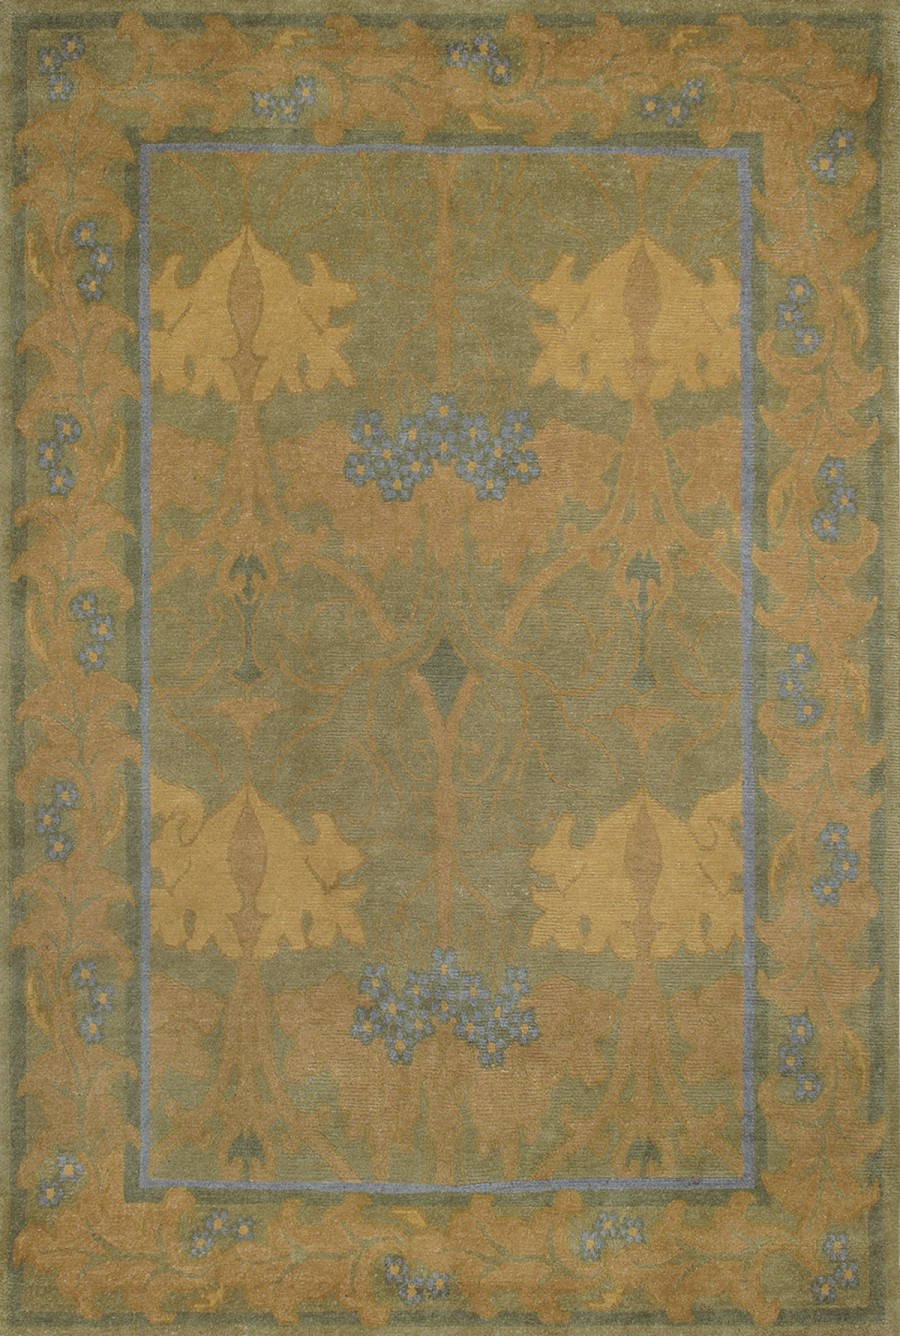 The Donegal rug by Stickley